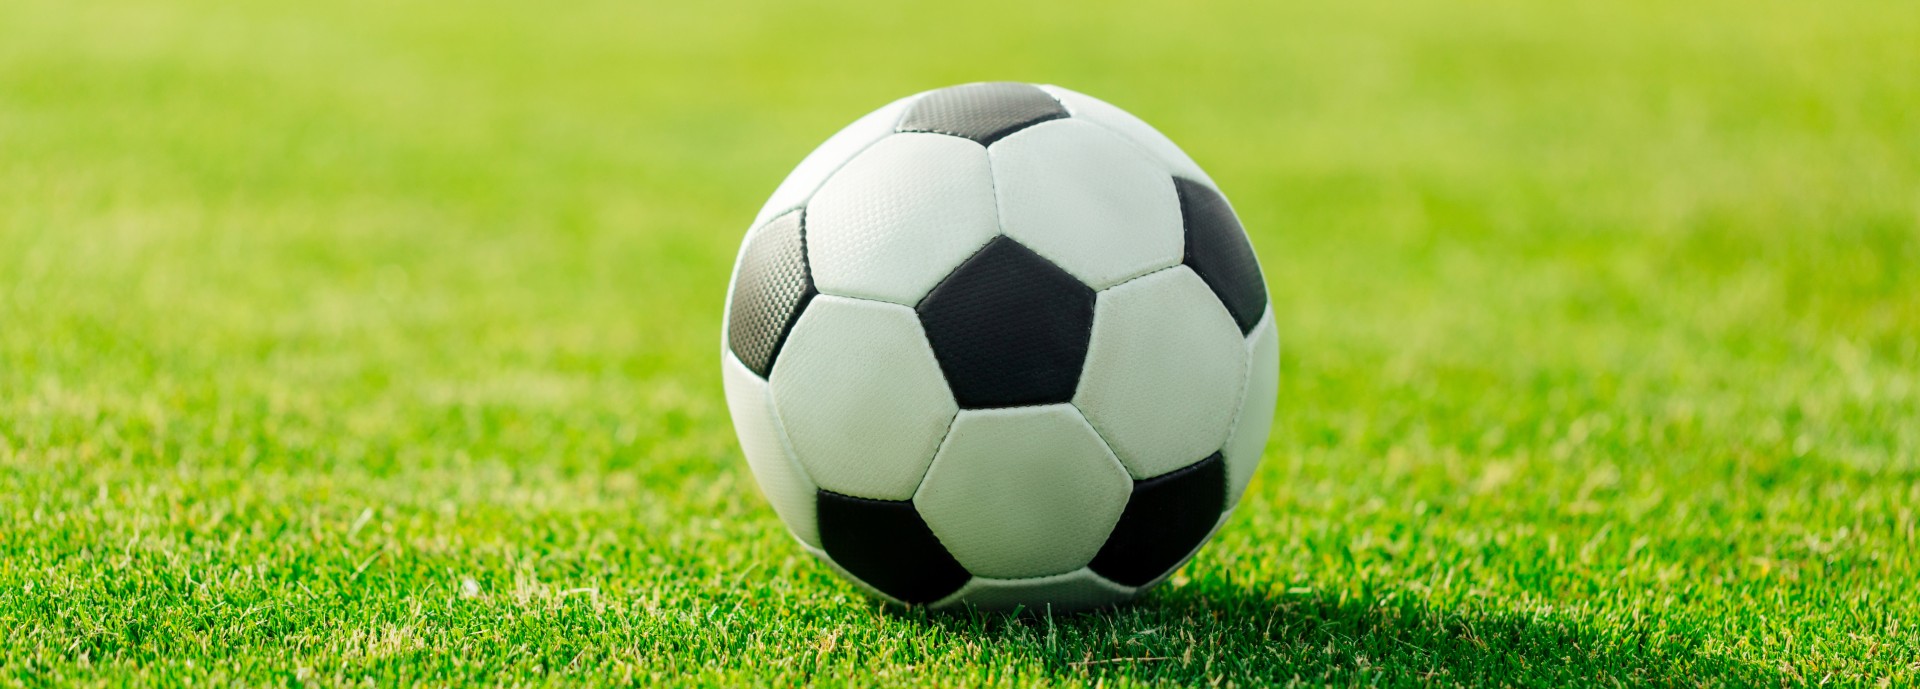 Close-up view of leather soccer ball on green grass